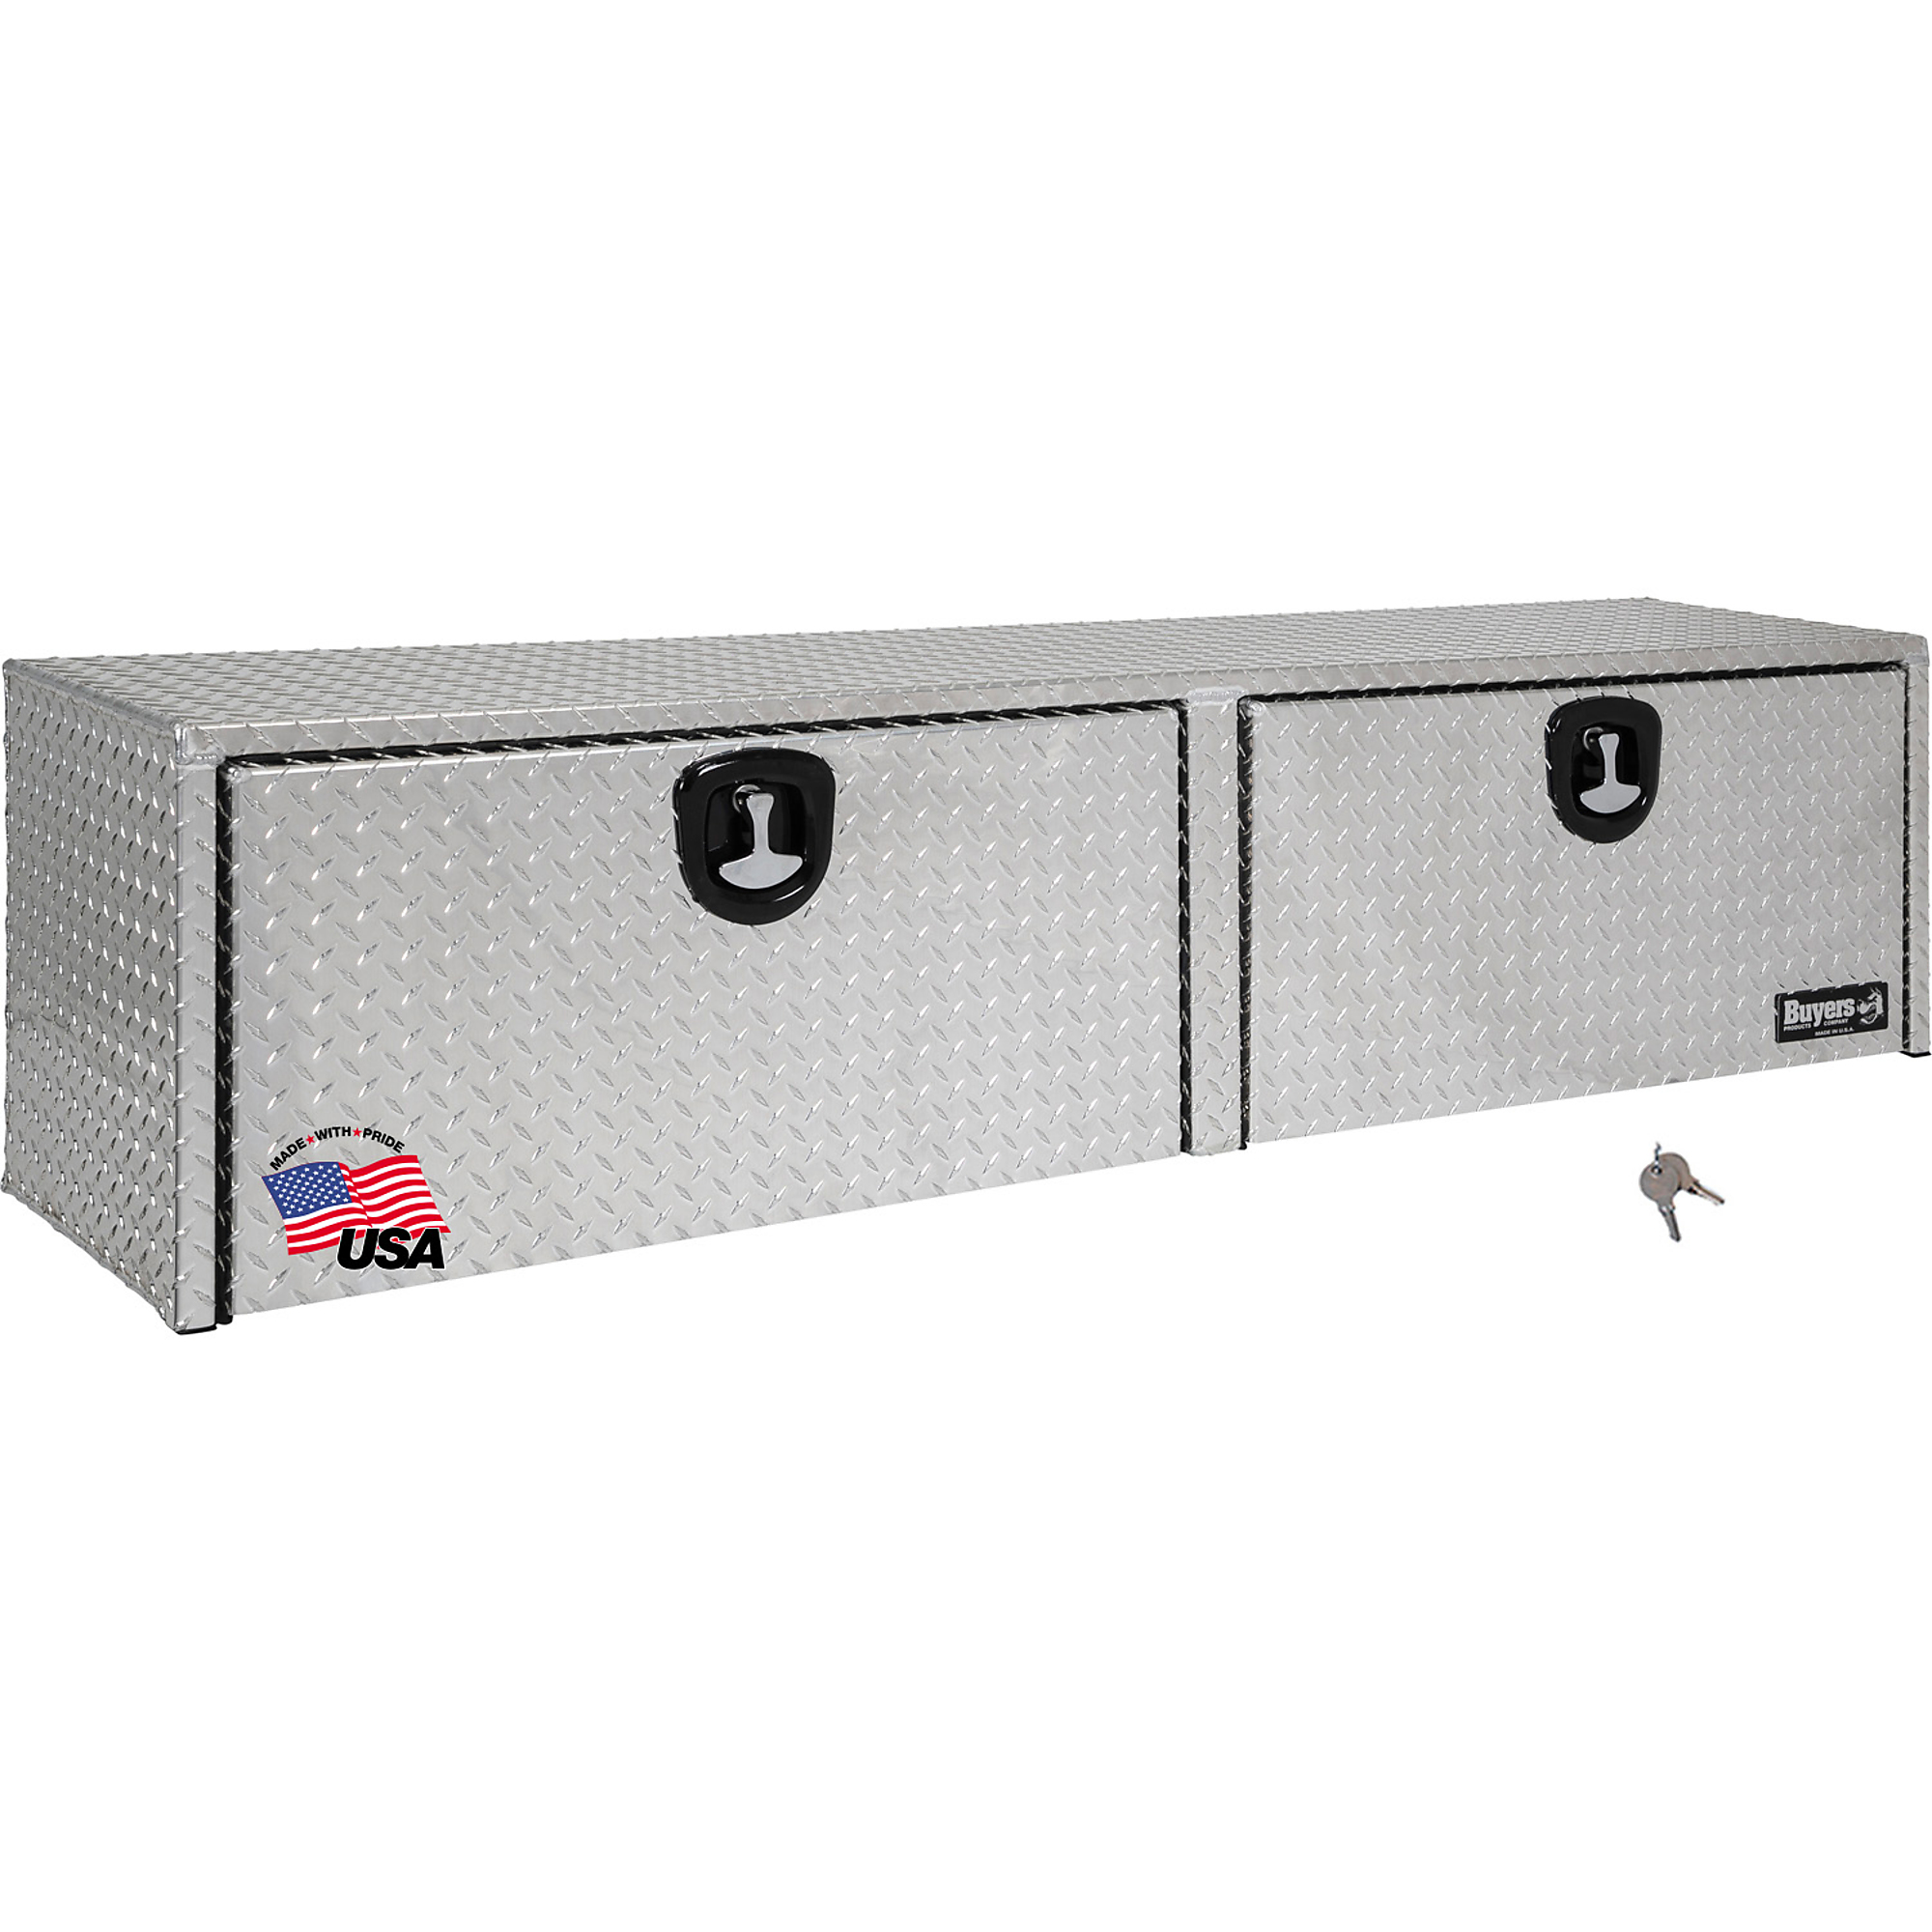 Buyers Products Topsider Truck Box, 90Inch Aluminum, Diamond Plate Silver, Model 1701565